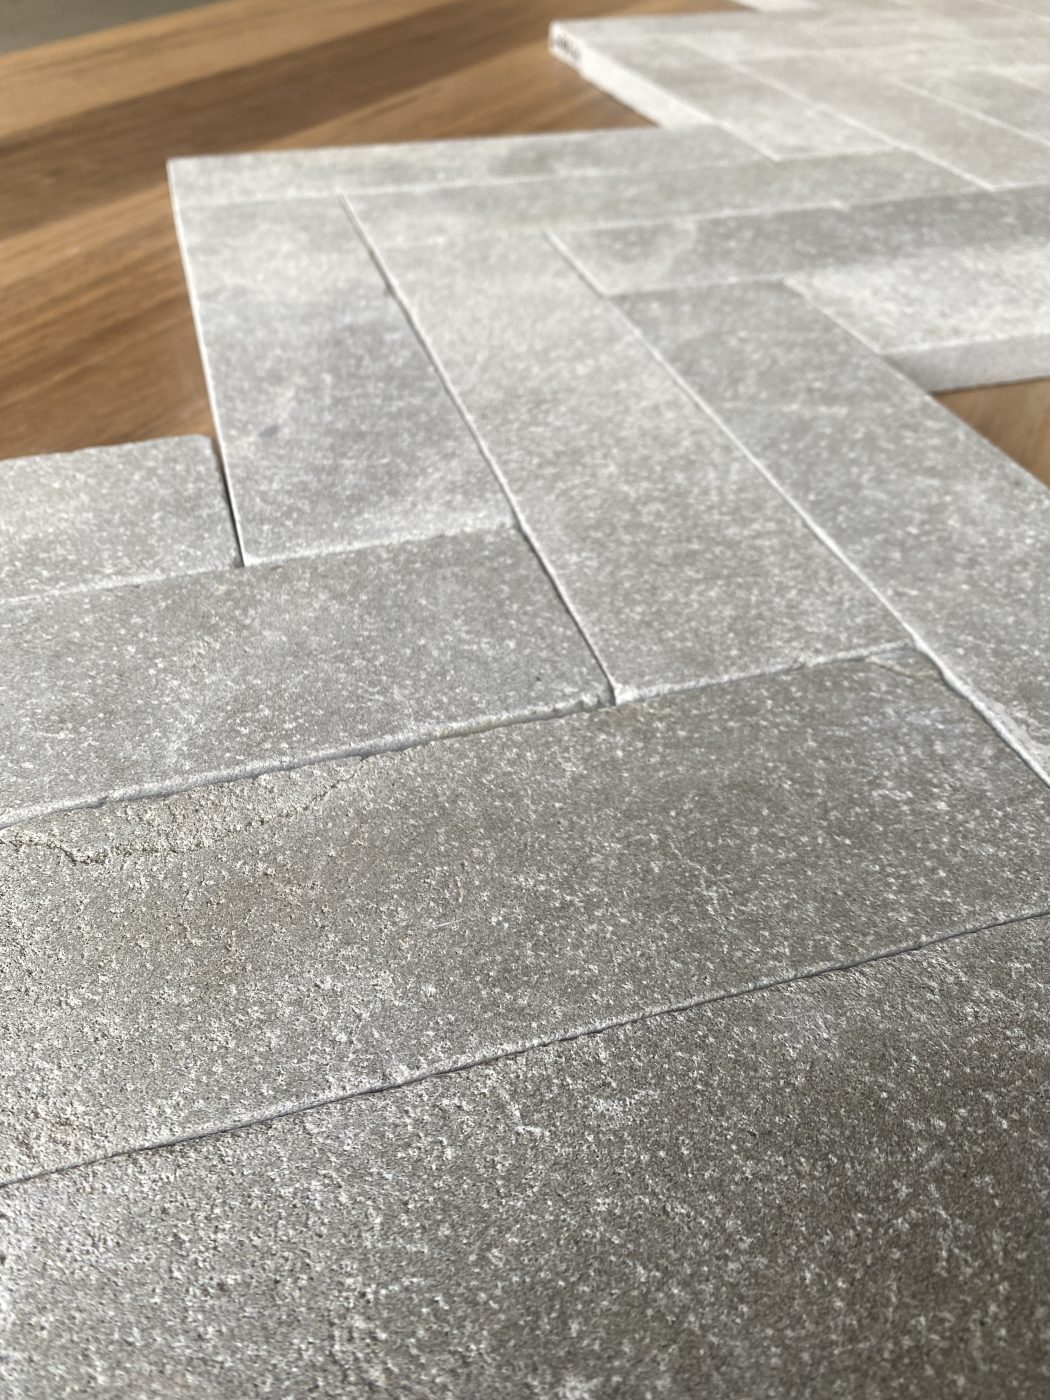 MADDISON-SANDBLASTED-TUMBLED-LIMESTONE-BATTONS_RMS-TRADERS_NATURAL-STONE-PAVER-SUPPLIER-MELBOURNE-3-scaled